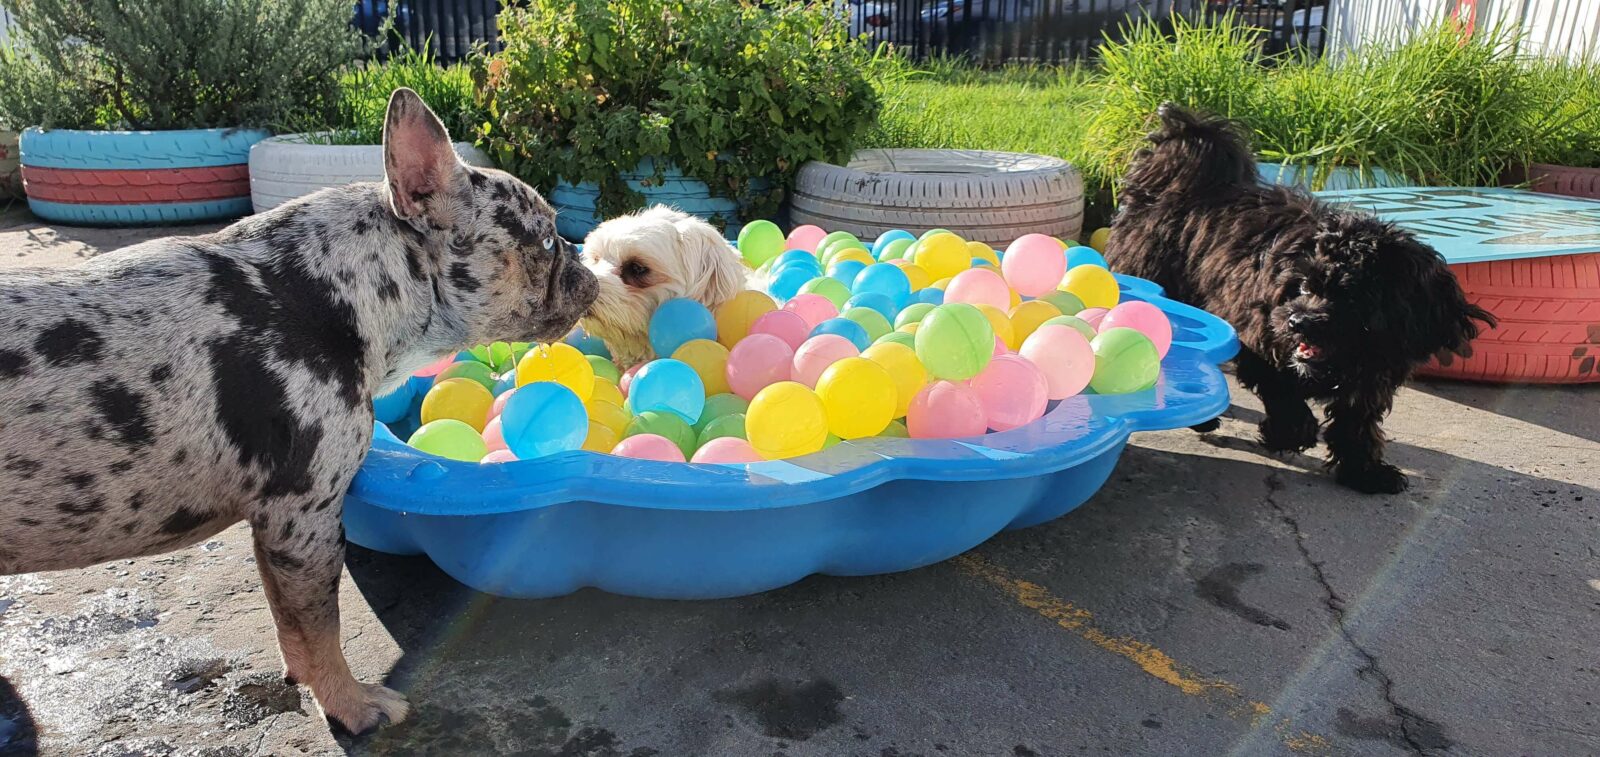 Little dogs playing in shell-pool with colourful balls